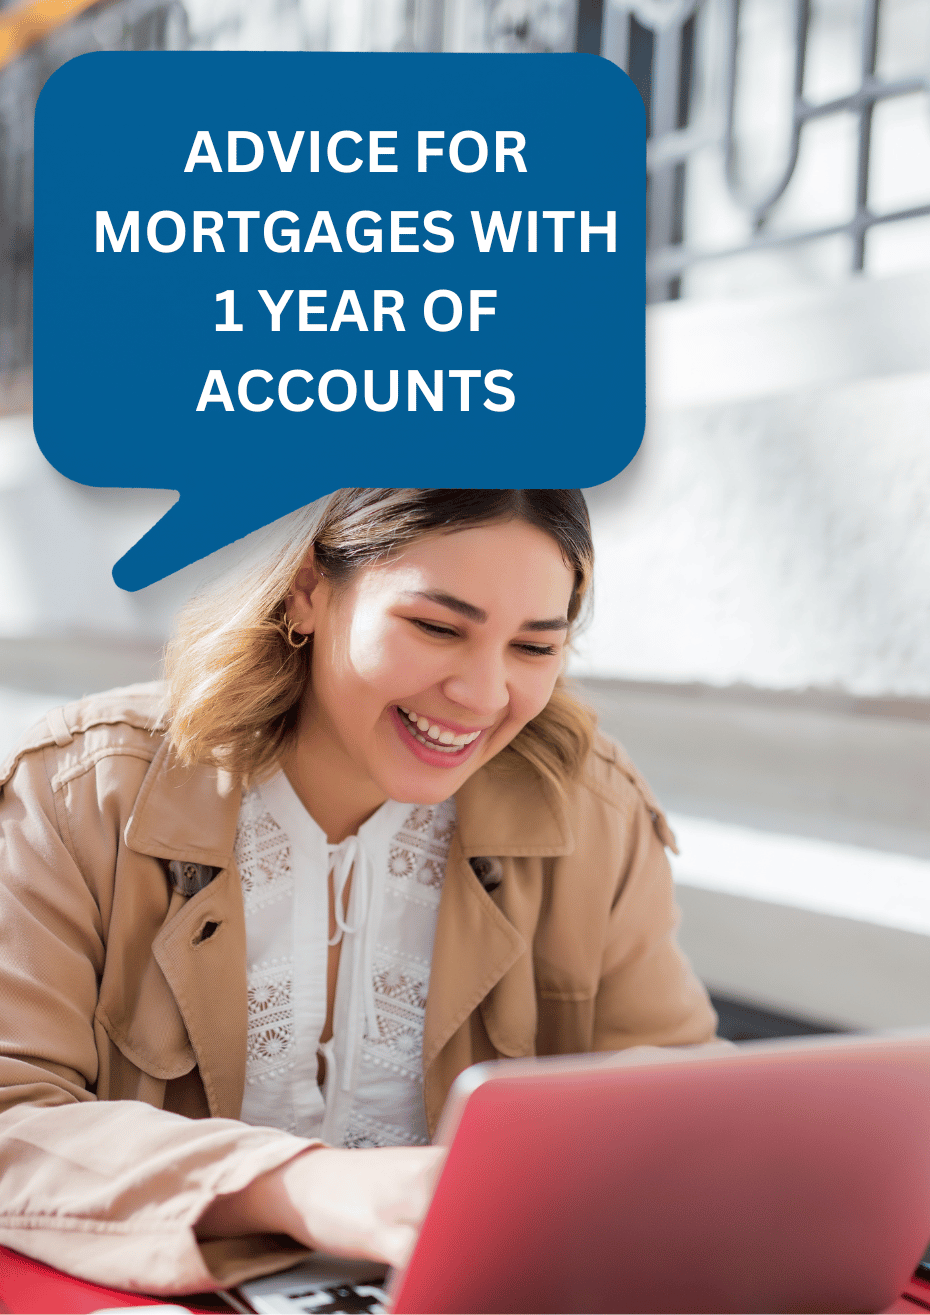 Advice for Mortgages with 1 year of Accounts